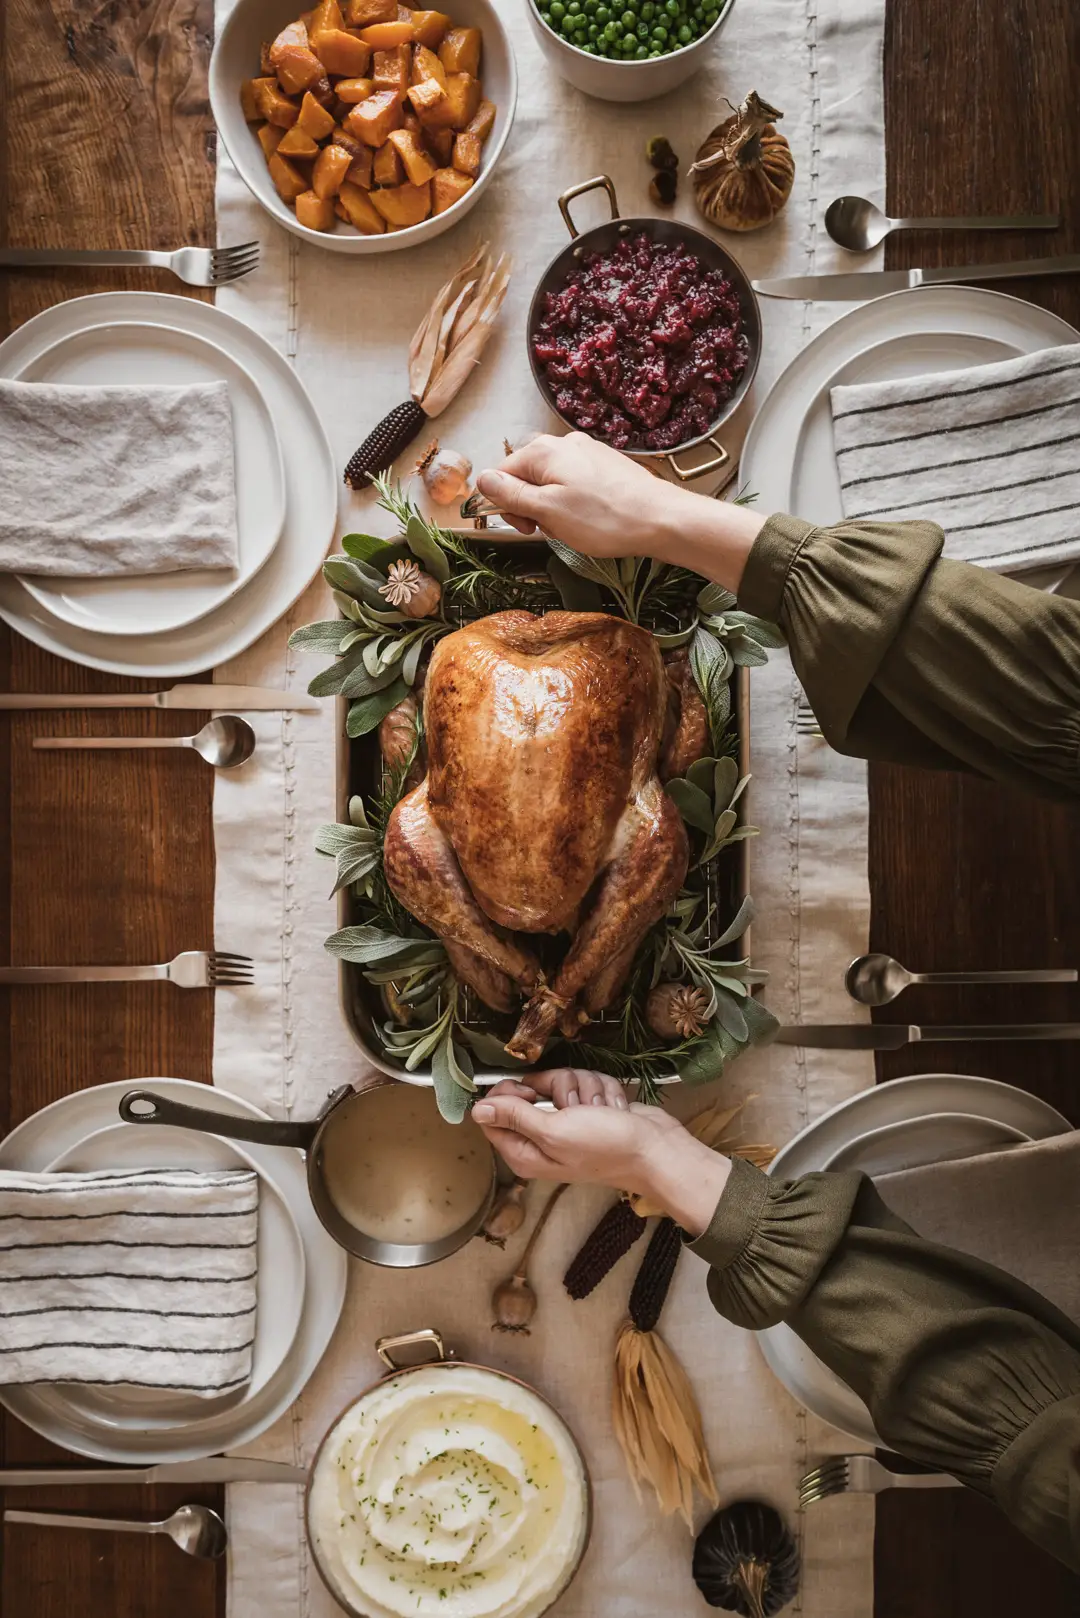 This cider brined turkey with cider herb gravy is the ultimate holiday turkey & gravy combination and will be the absolute star of your table